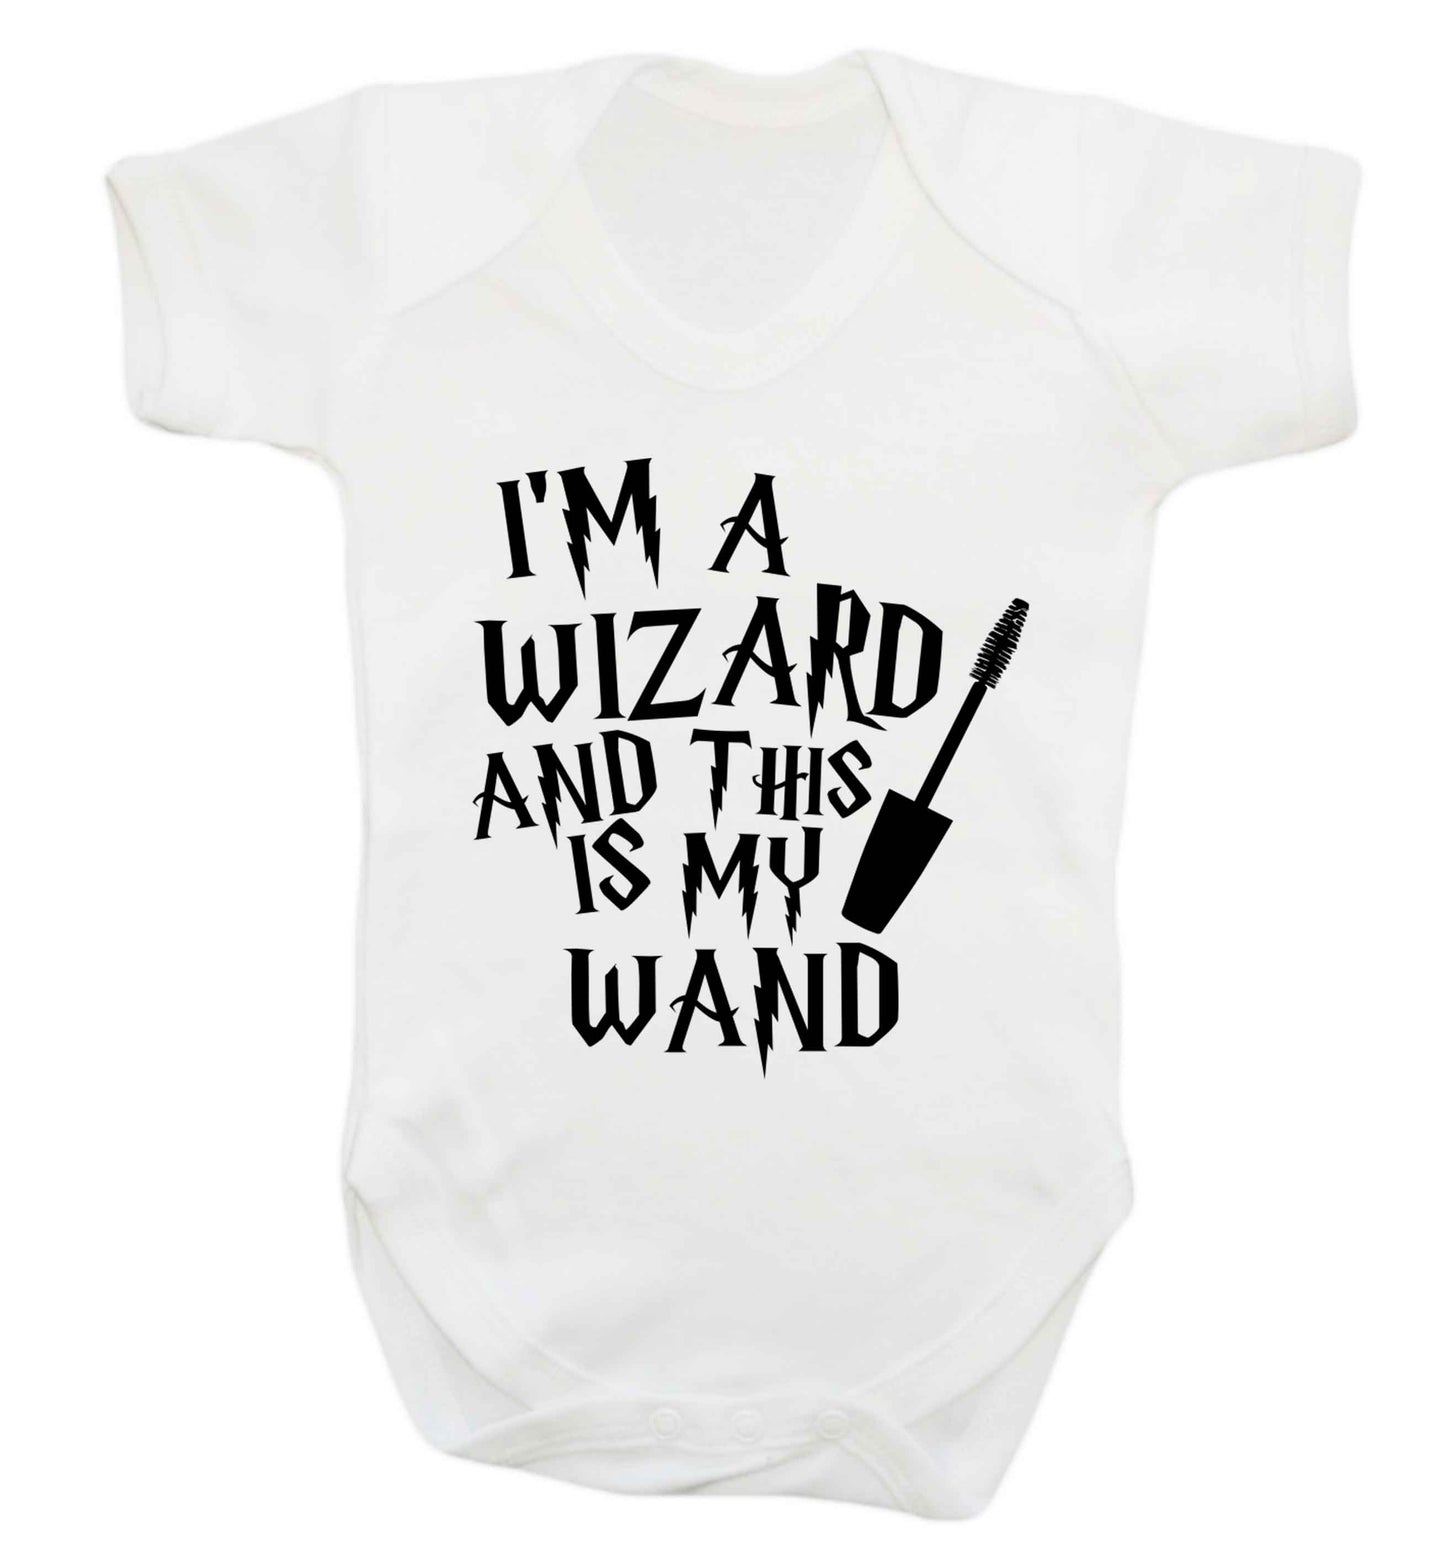 I'm a wizard and this is my wand Baby Vest white 18-24 months